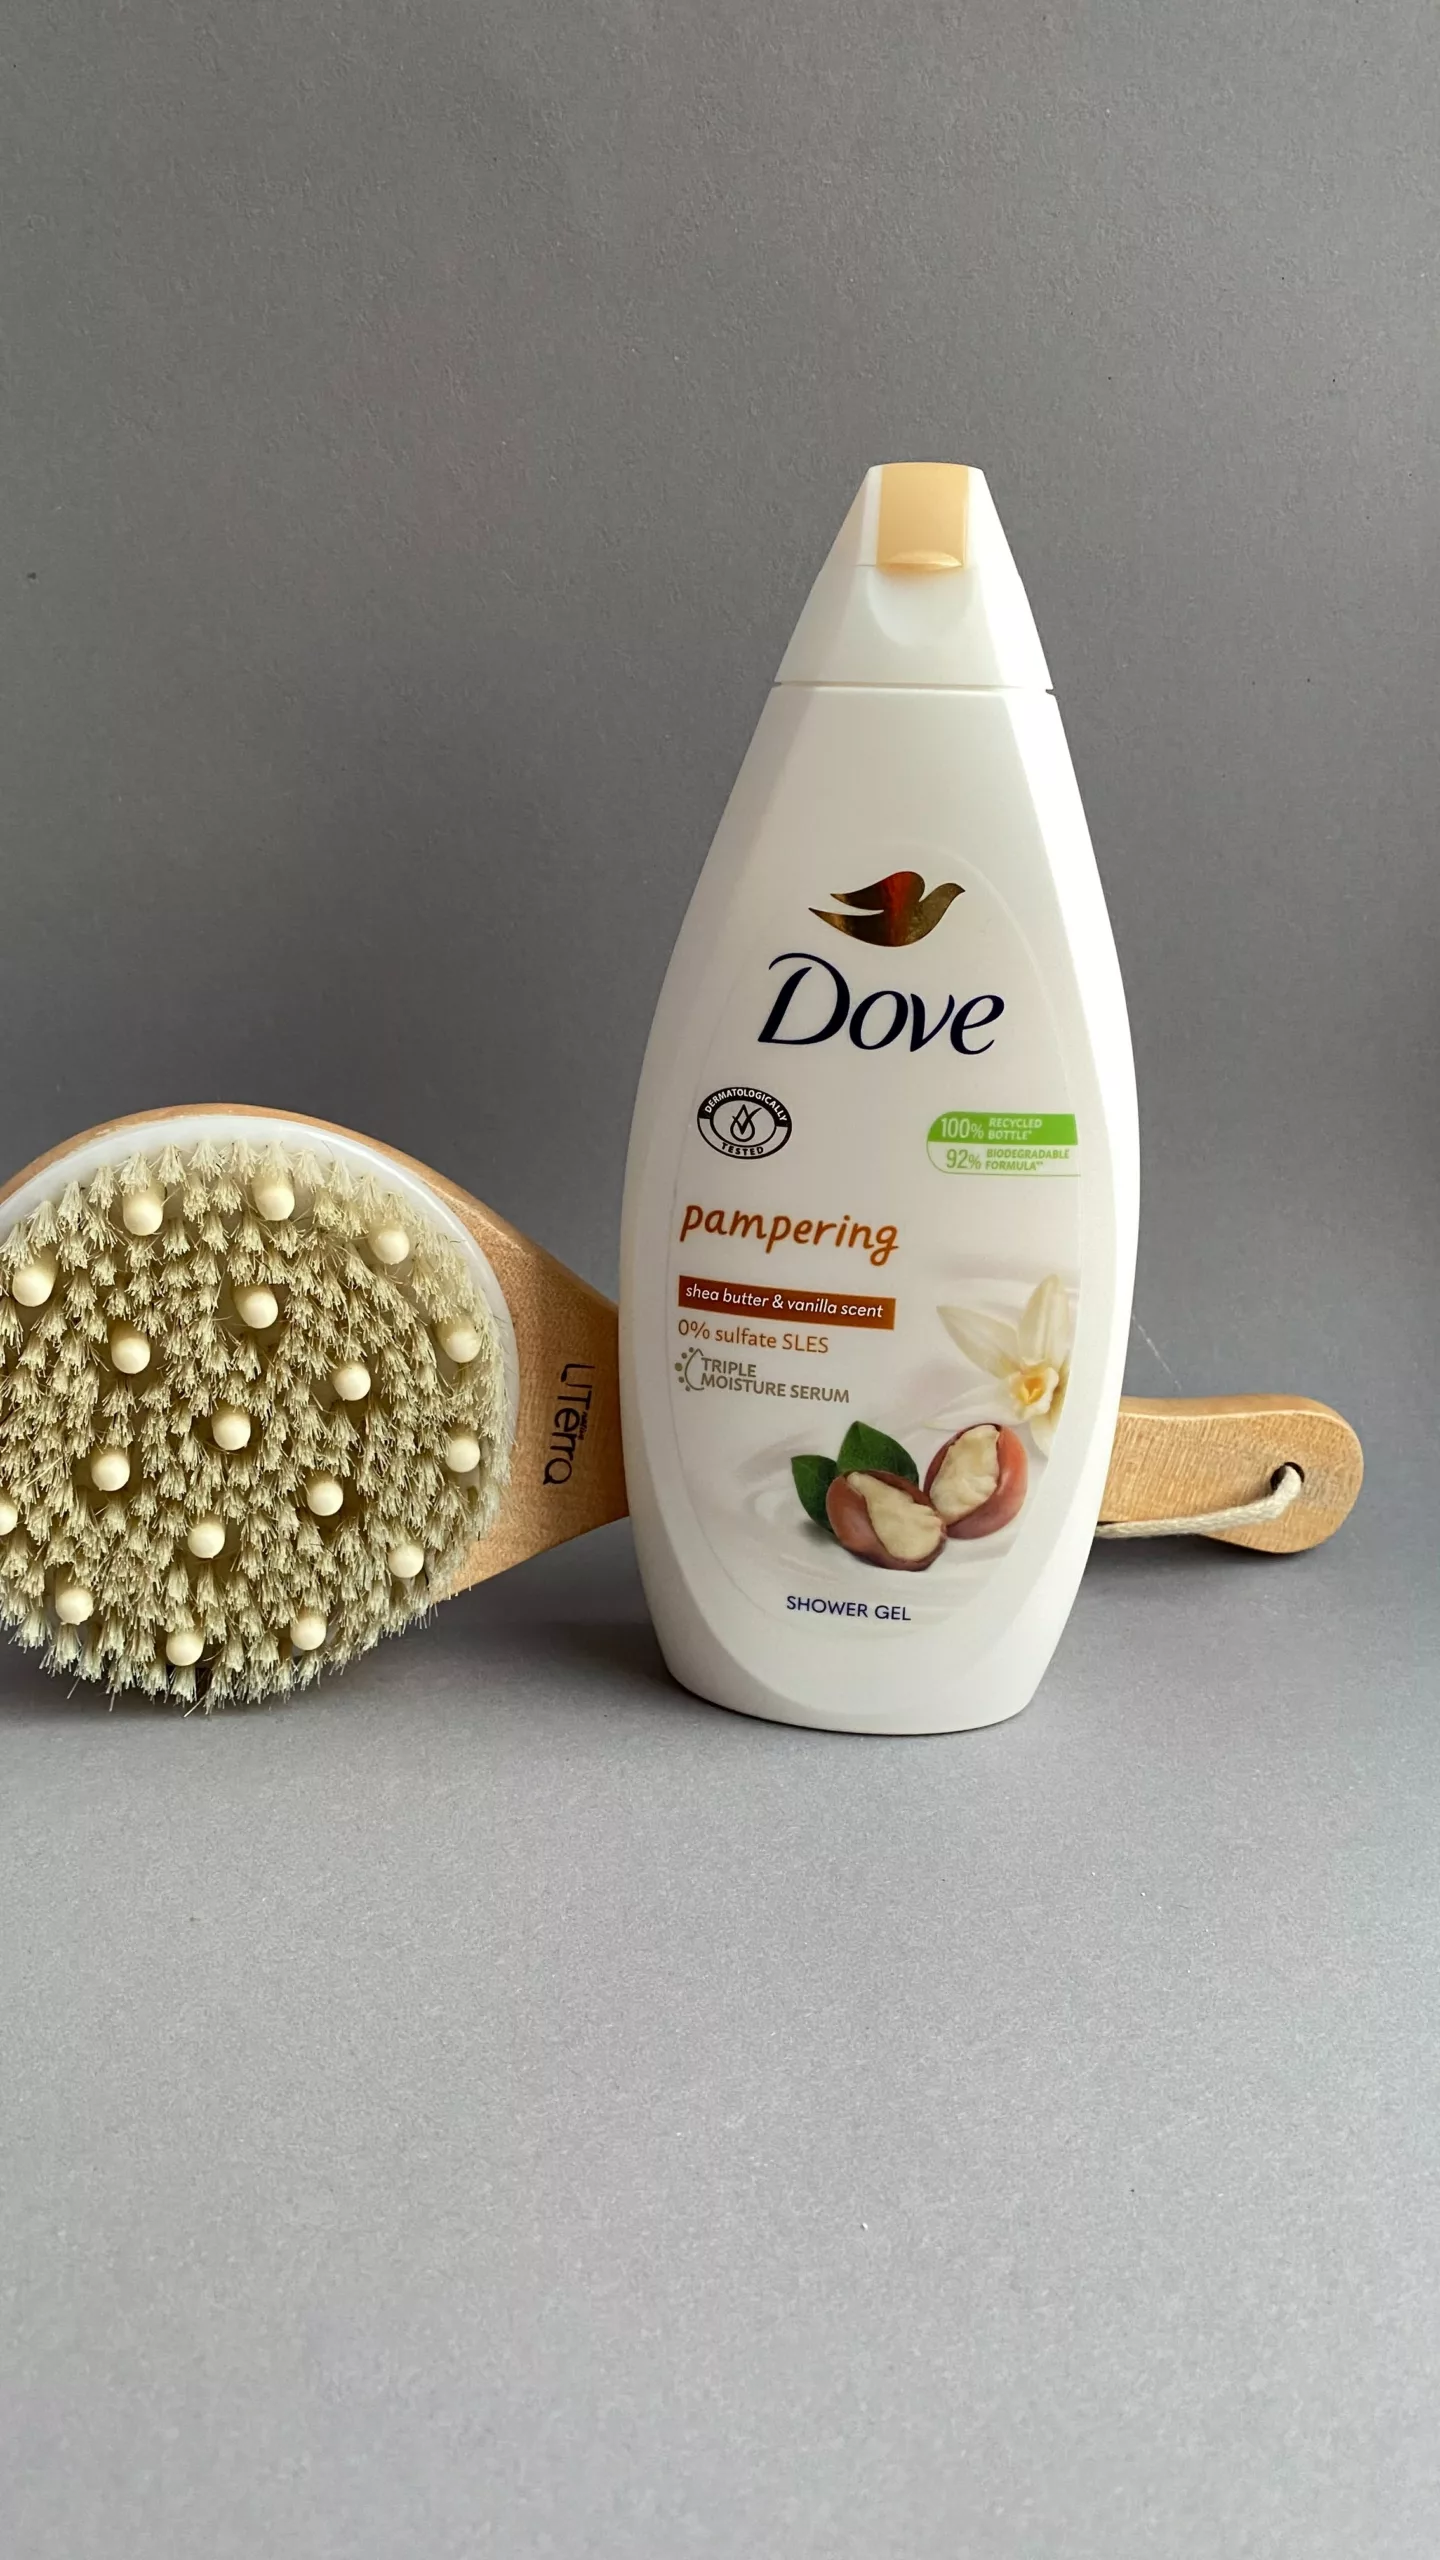 Dove's stance on animal testing: Cruelty-free or not?